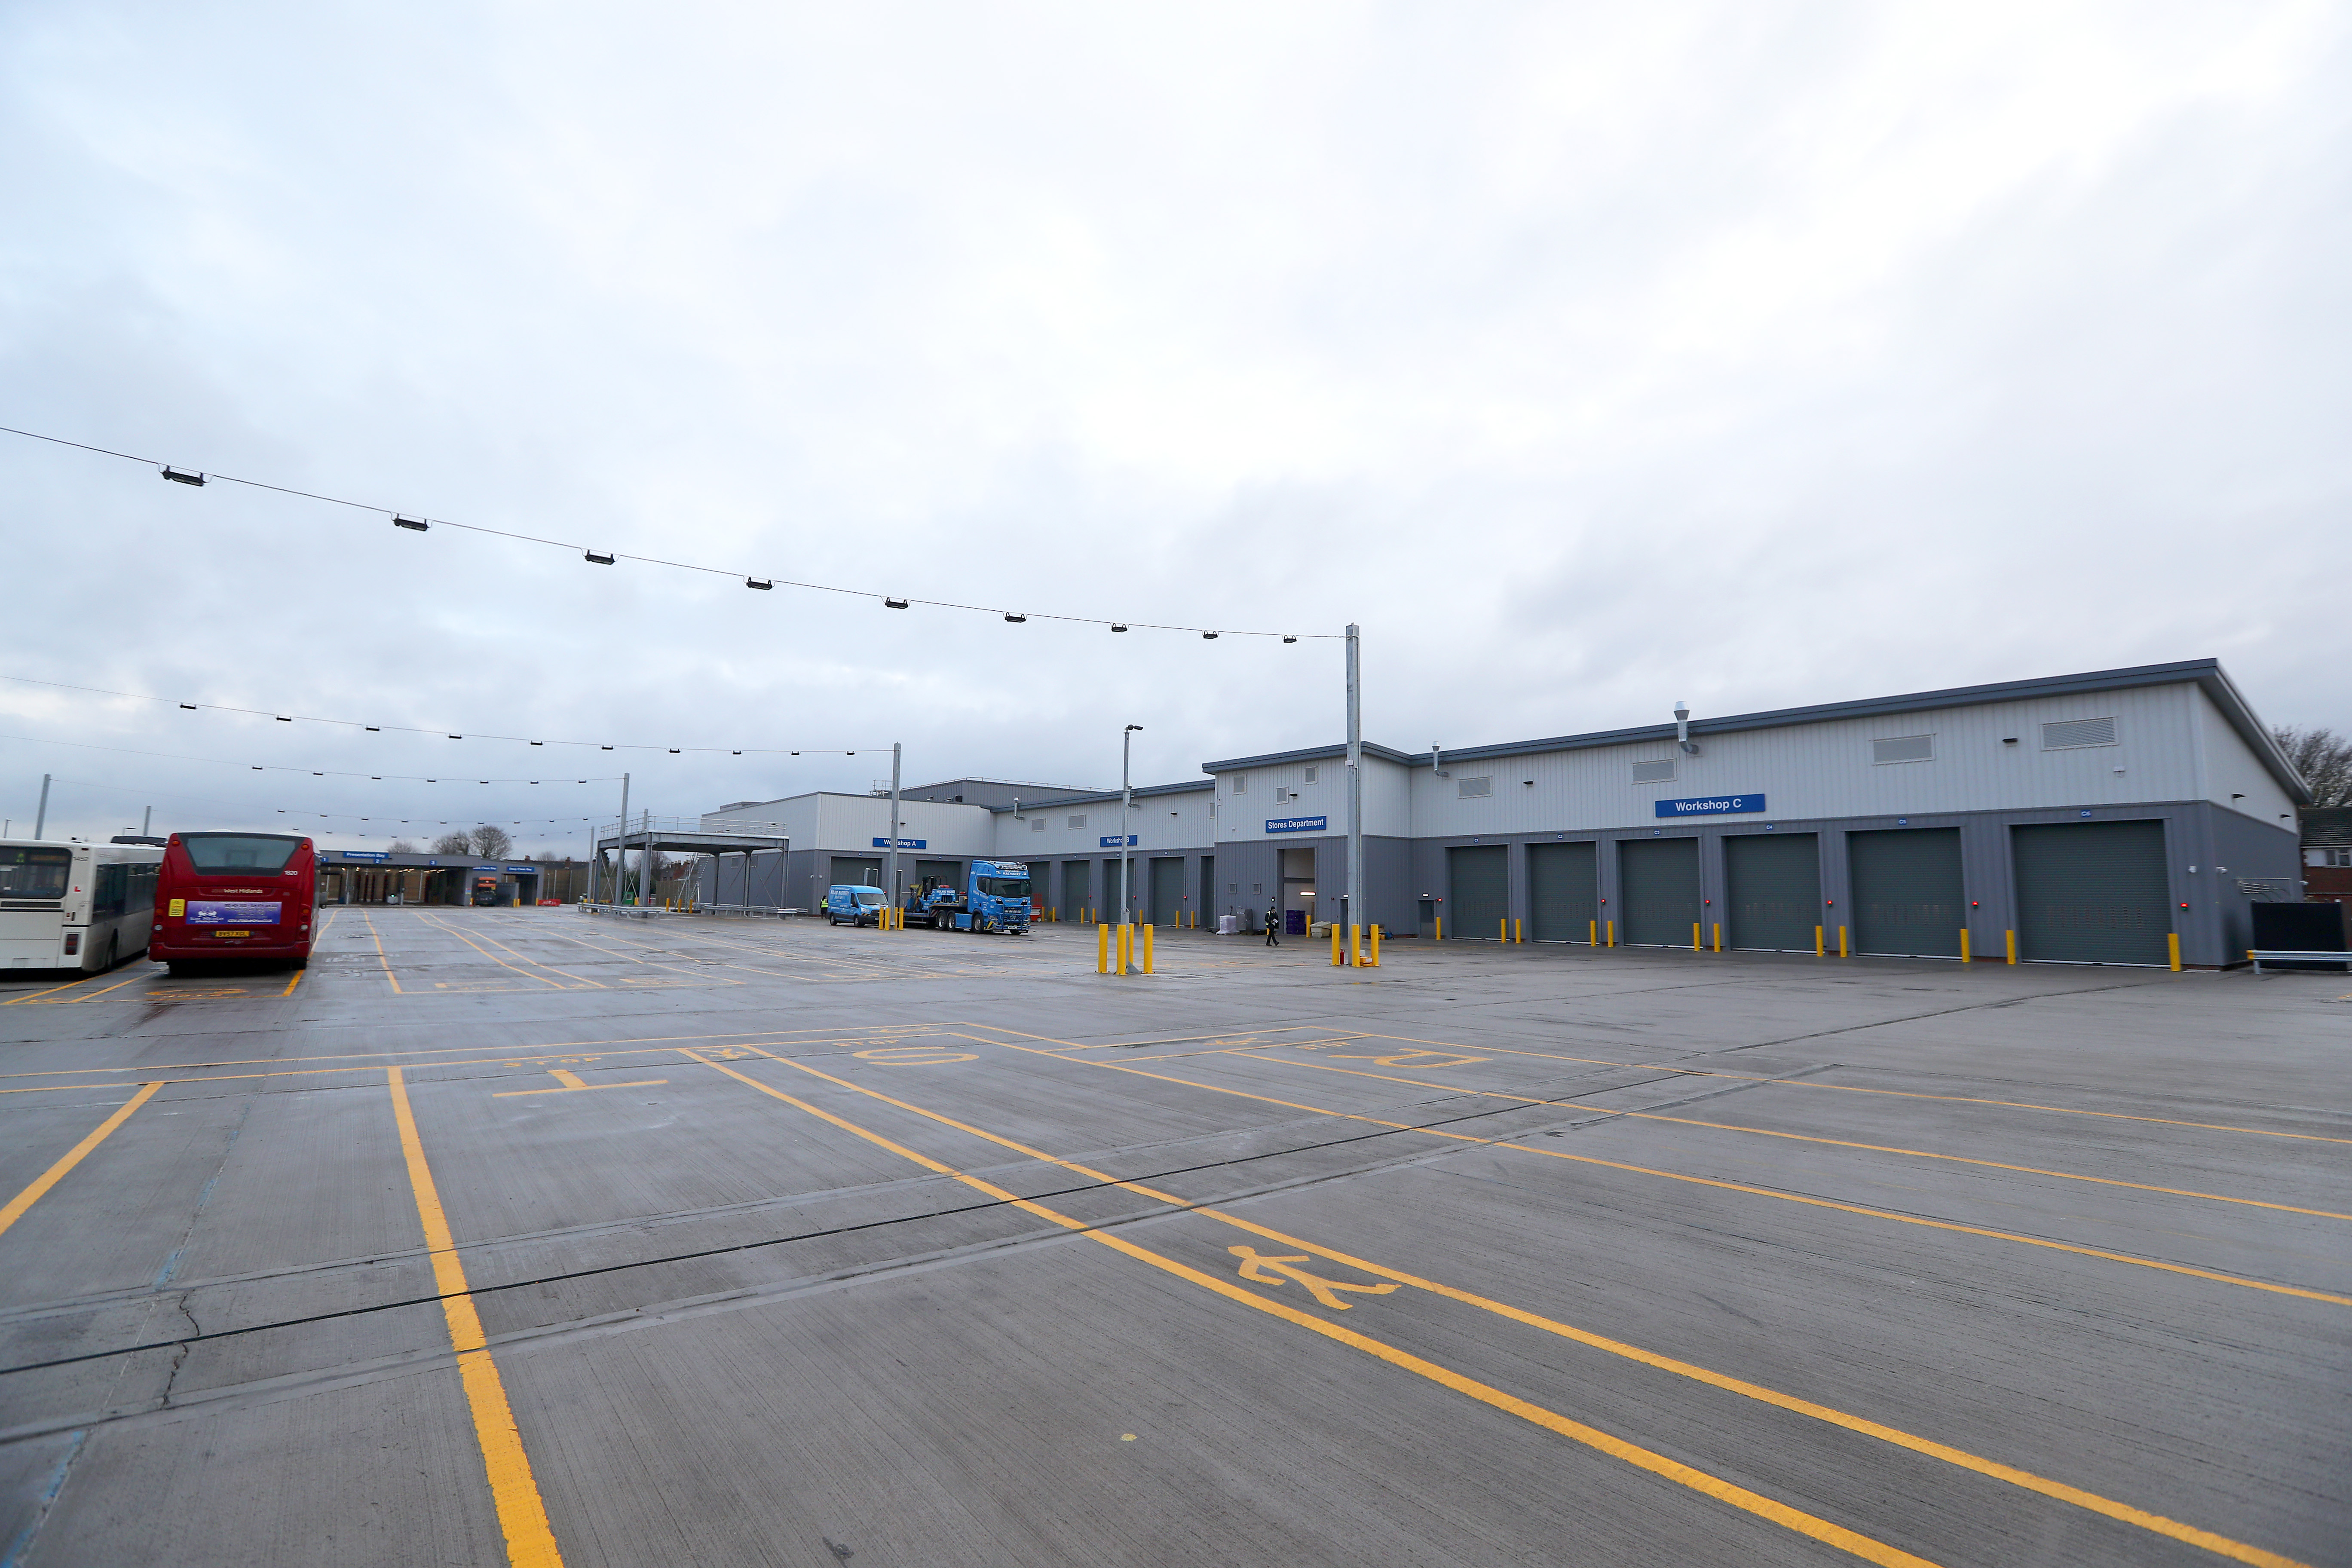 National Express’ new Perry Barr depot opens